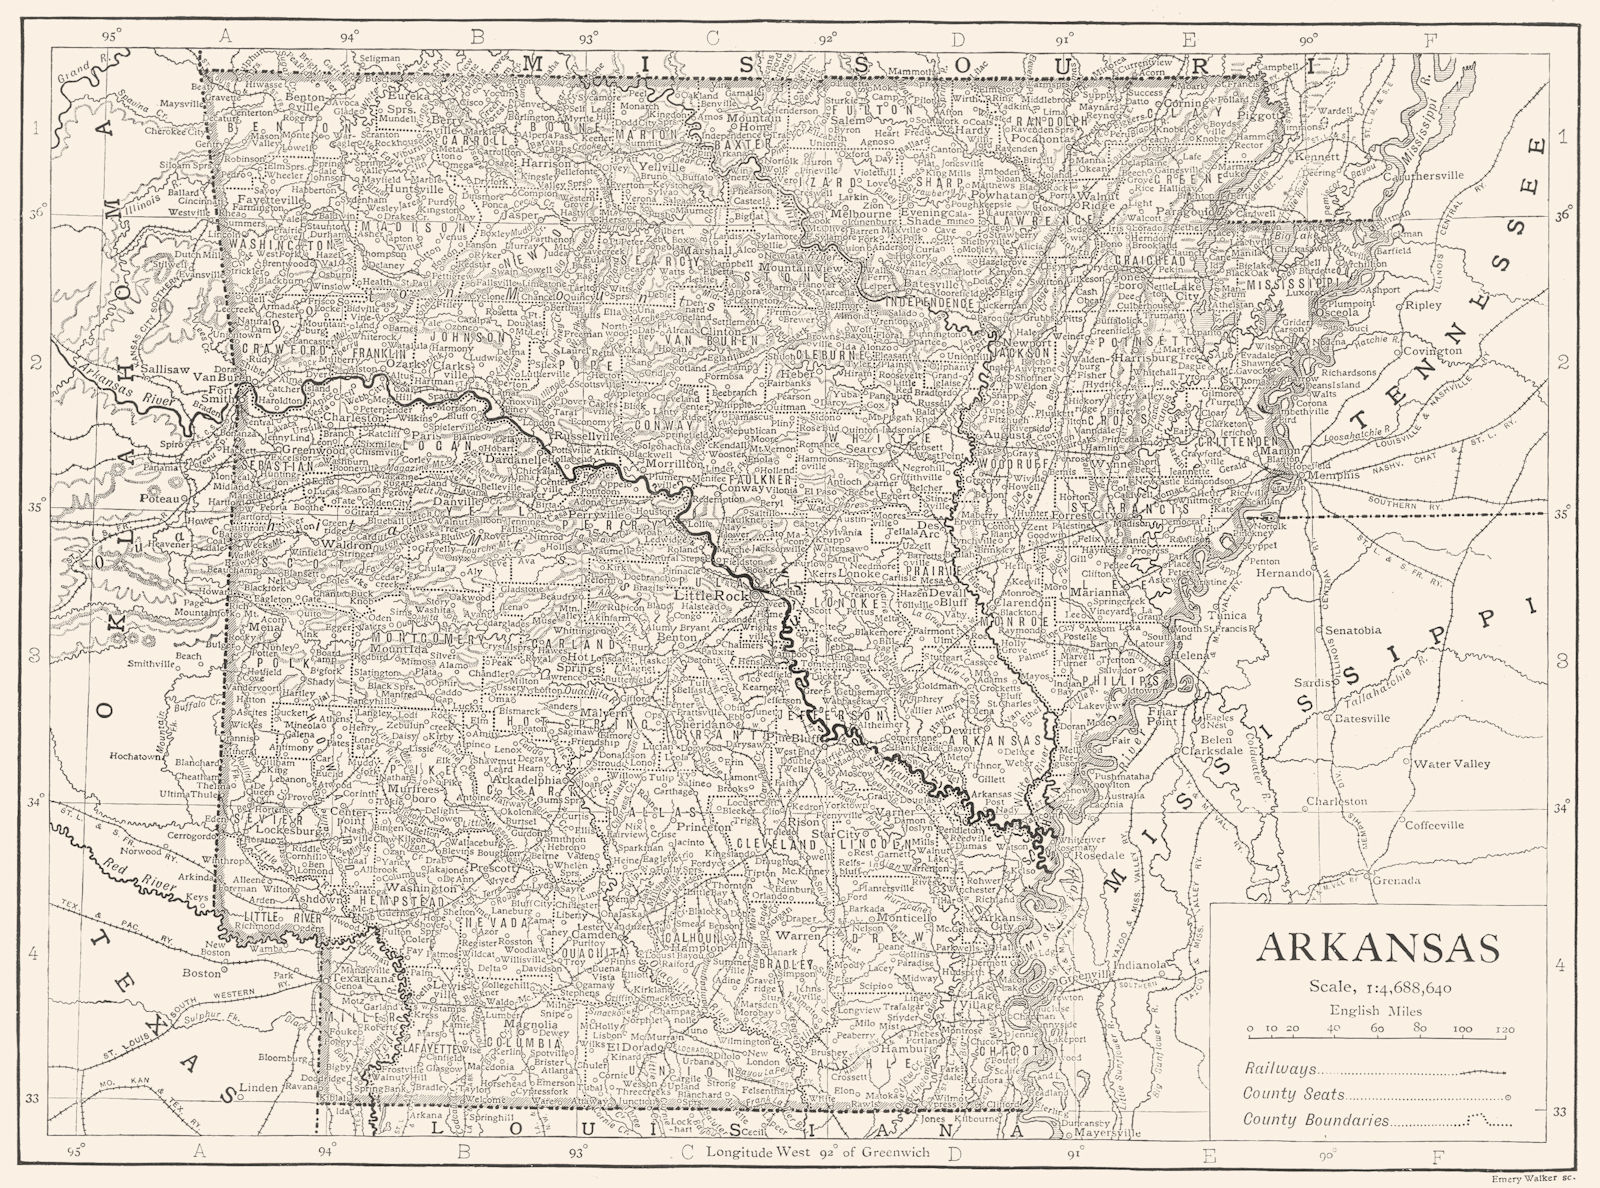 ARKANSAS. Arkansas state map showing counties 1910 old antique plan chart